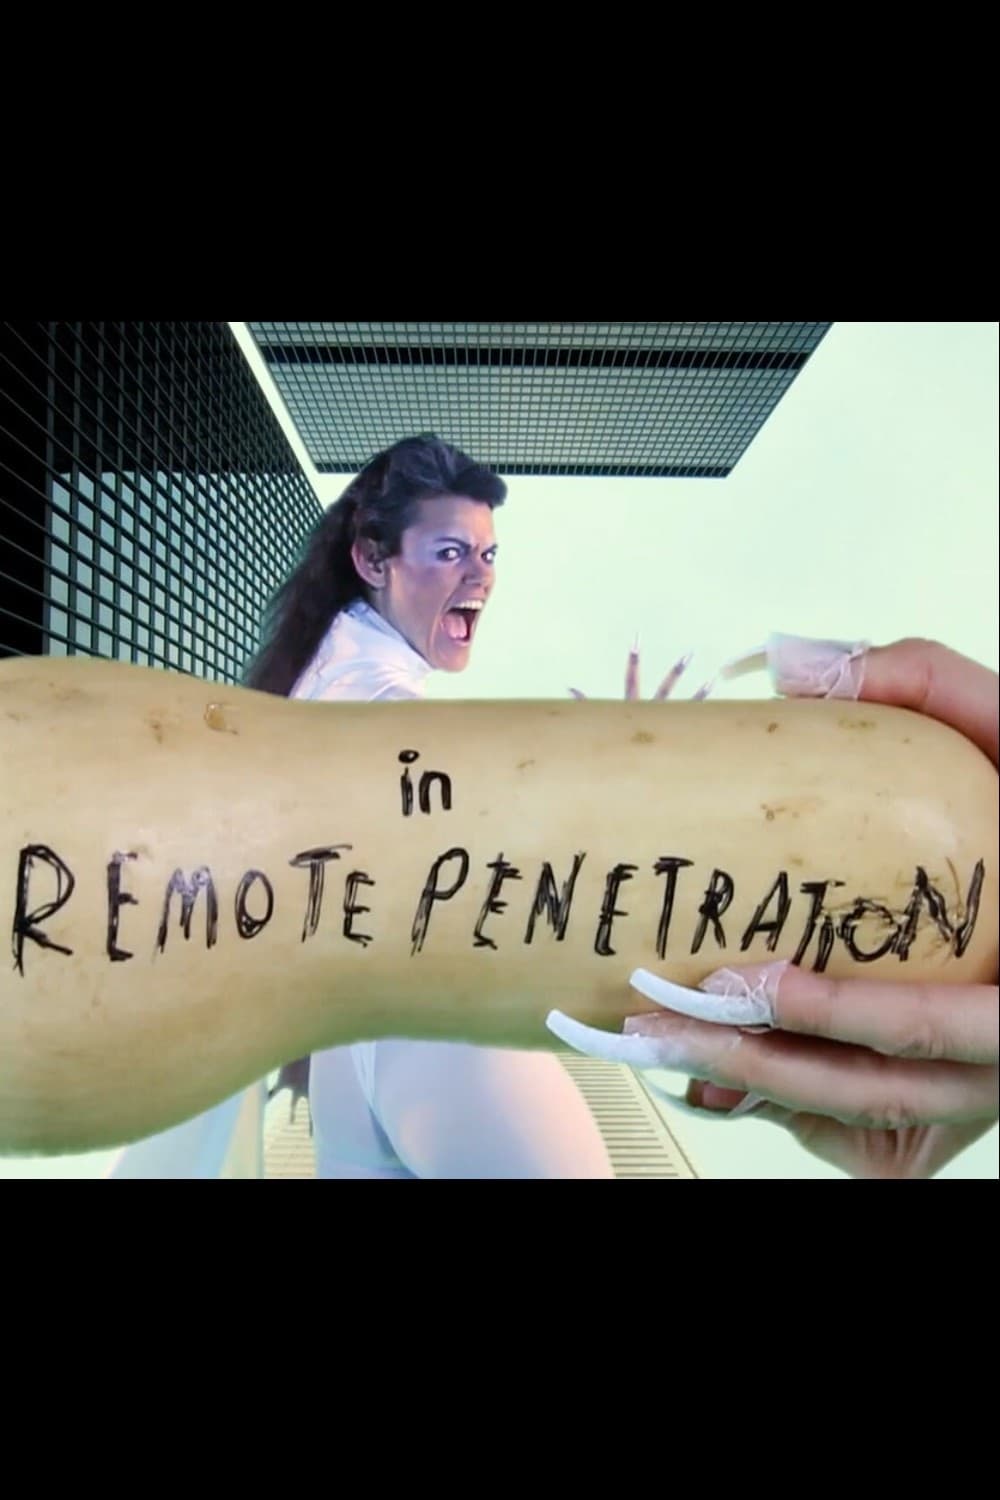 Remote Penetration / Stain of History